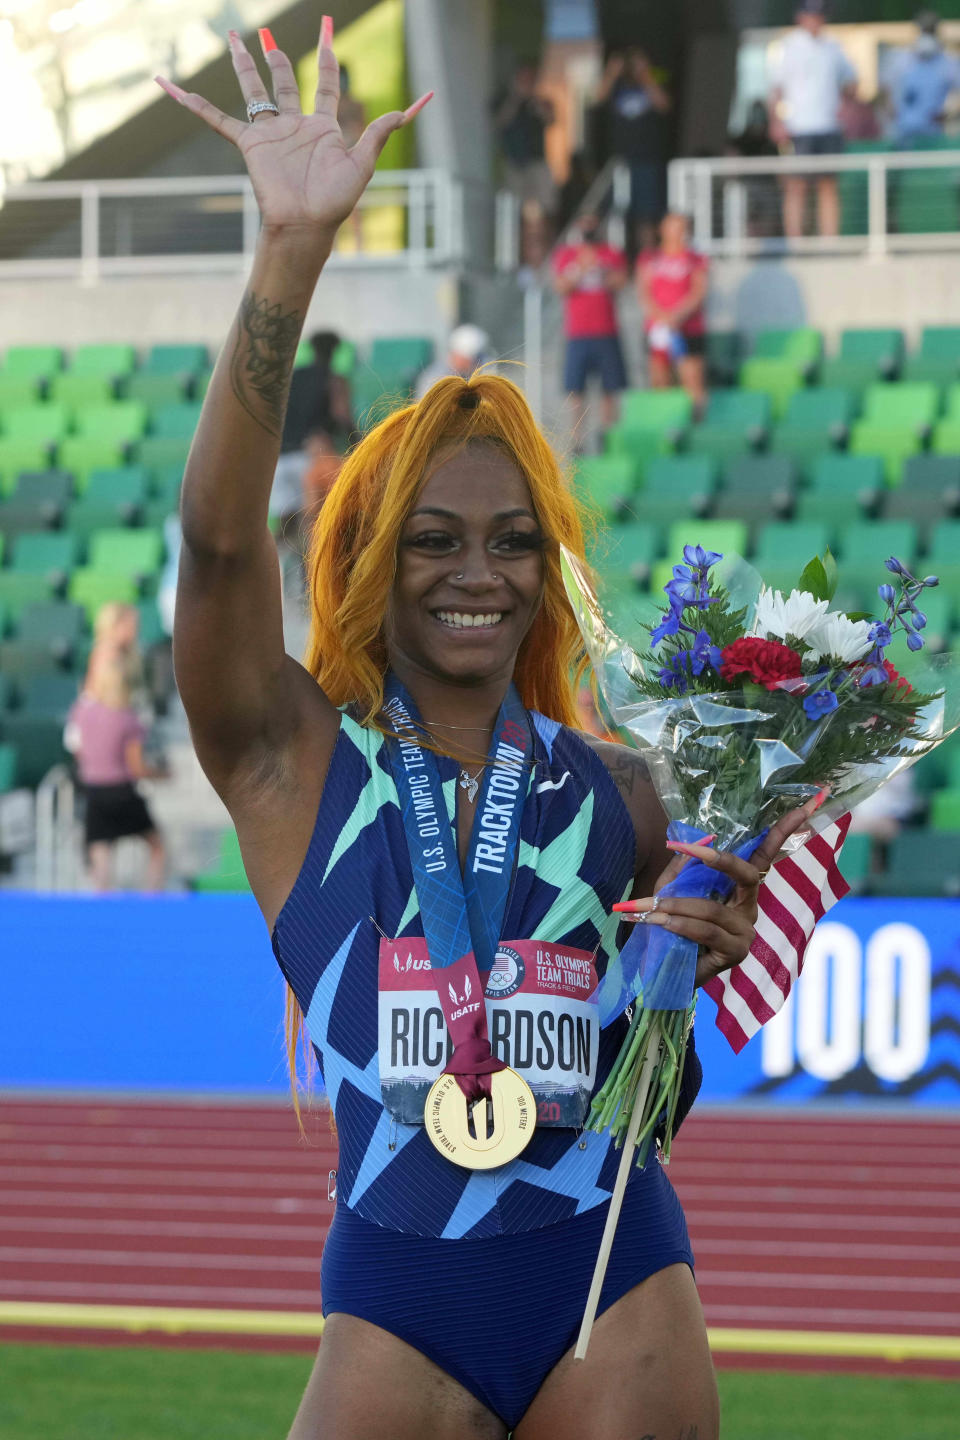 Richardson celebrates after winning the women's 100m at Olympic trials.